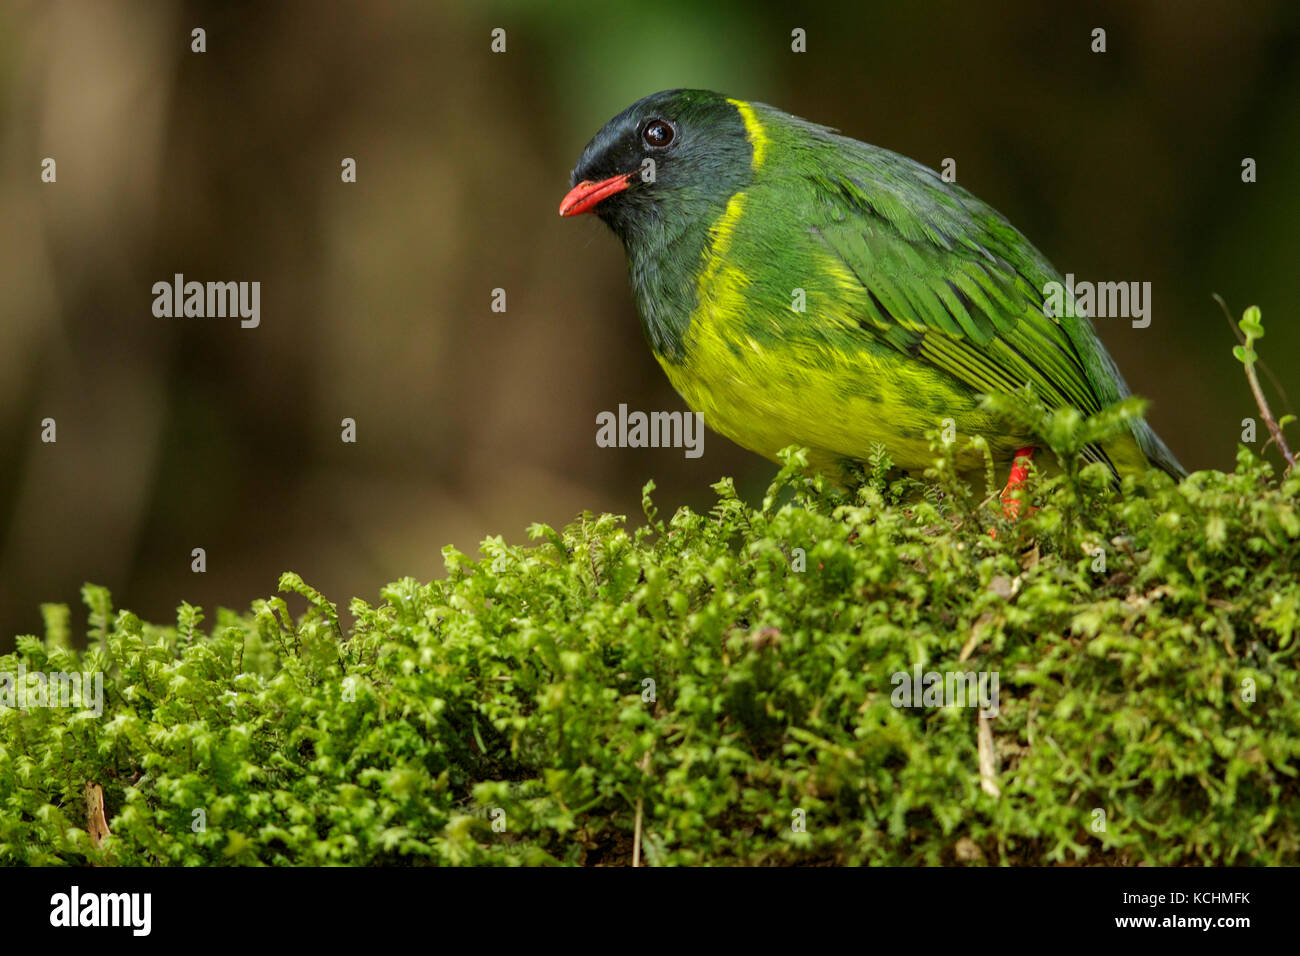 Green and Black Fruiteater (Pipreola riefferii)  perched on a branch in the mountains of Colombia, South America. Stock Photo